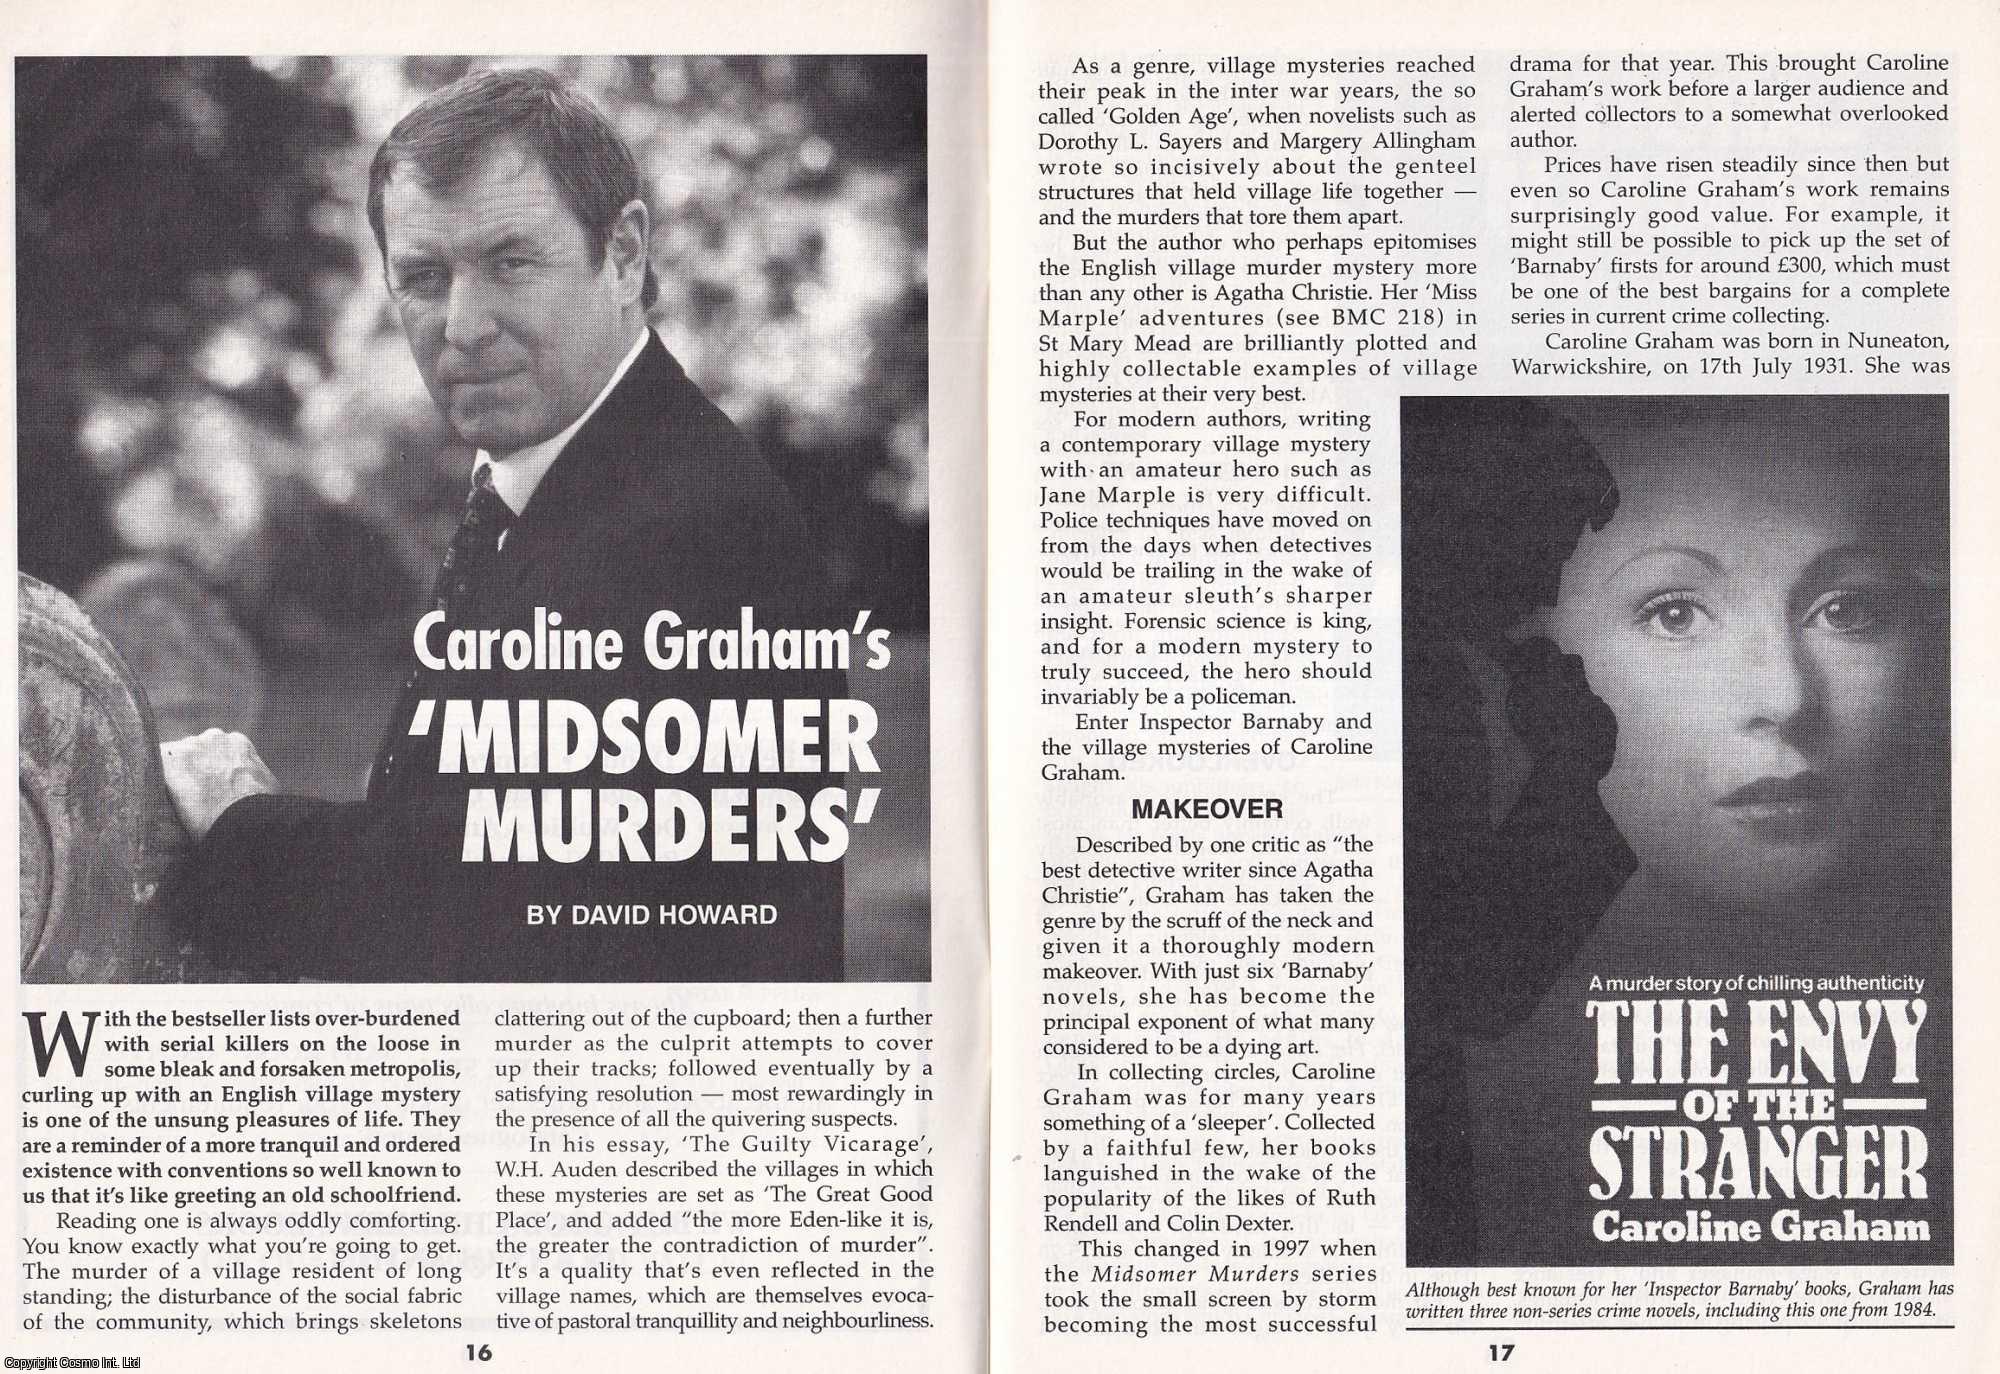 David Howard - Caroline Graham's Midsomer Murders. This is an original article separated from an issue of The Book & Magazine Collector publication, 2003.